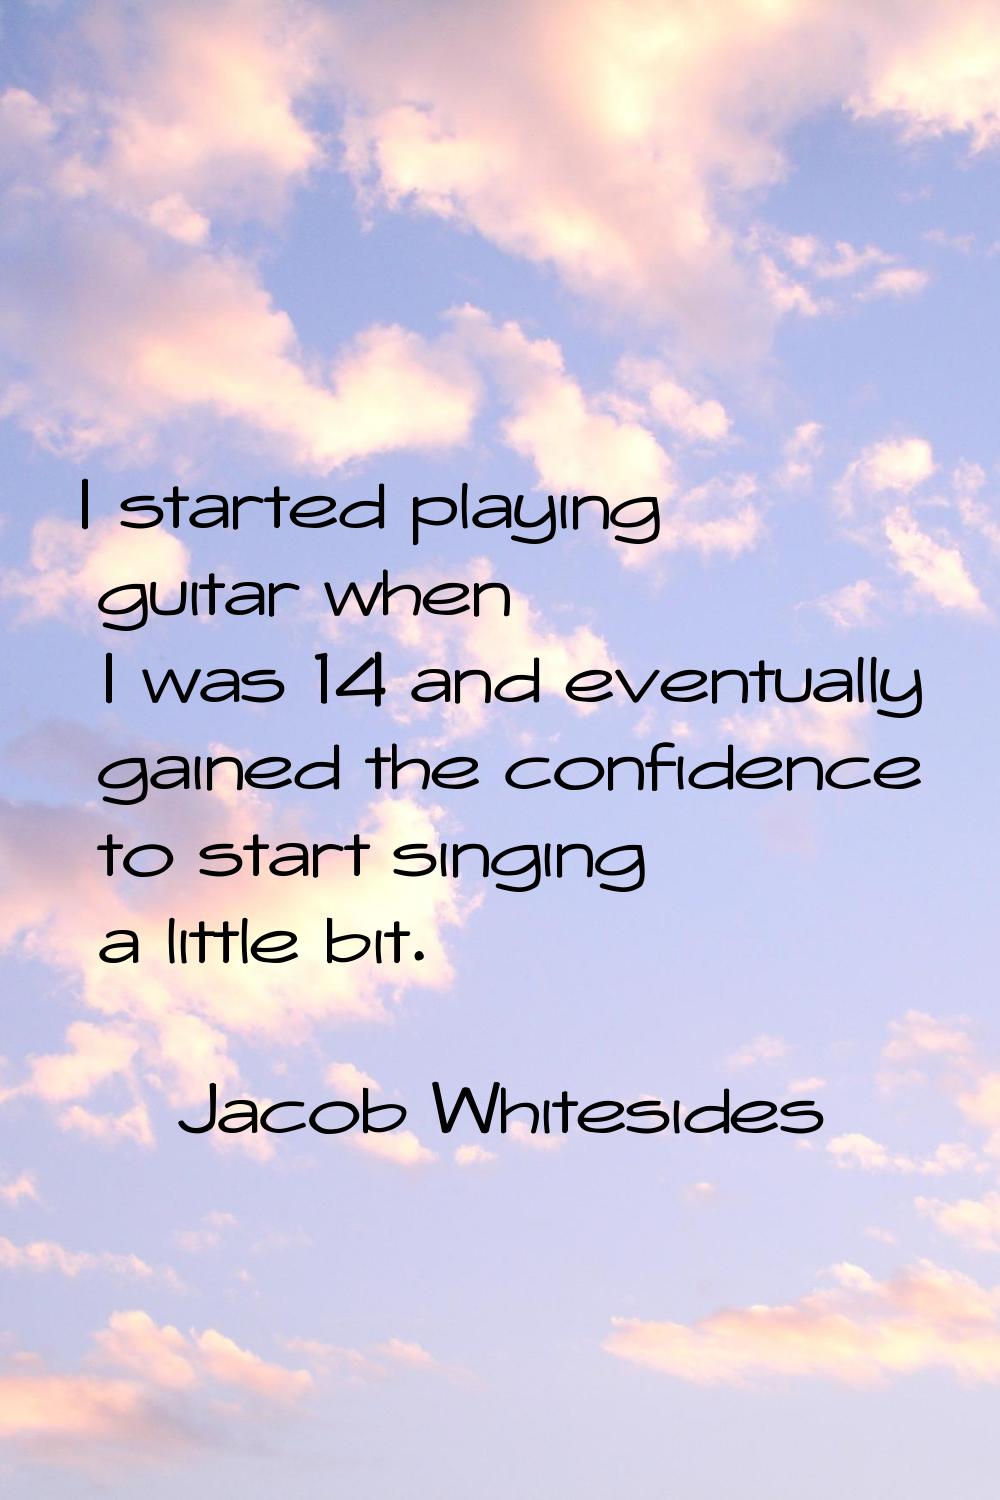 I started playing guitar when I was 14 and eventually gained the confidence to start singing a litt